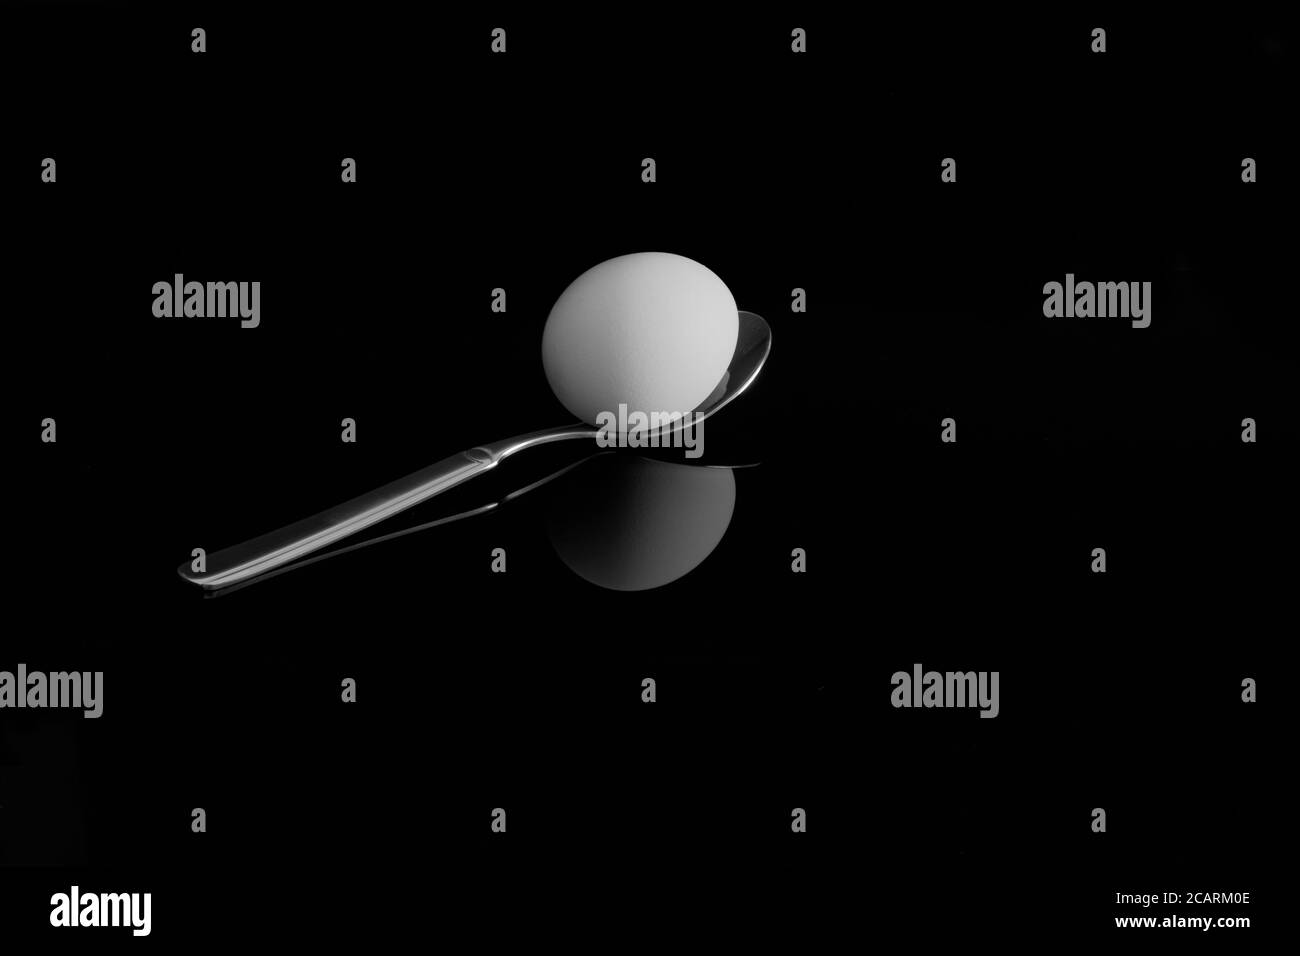 An egg on a spoon. With reflection on a black background Stock Photo